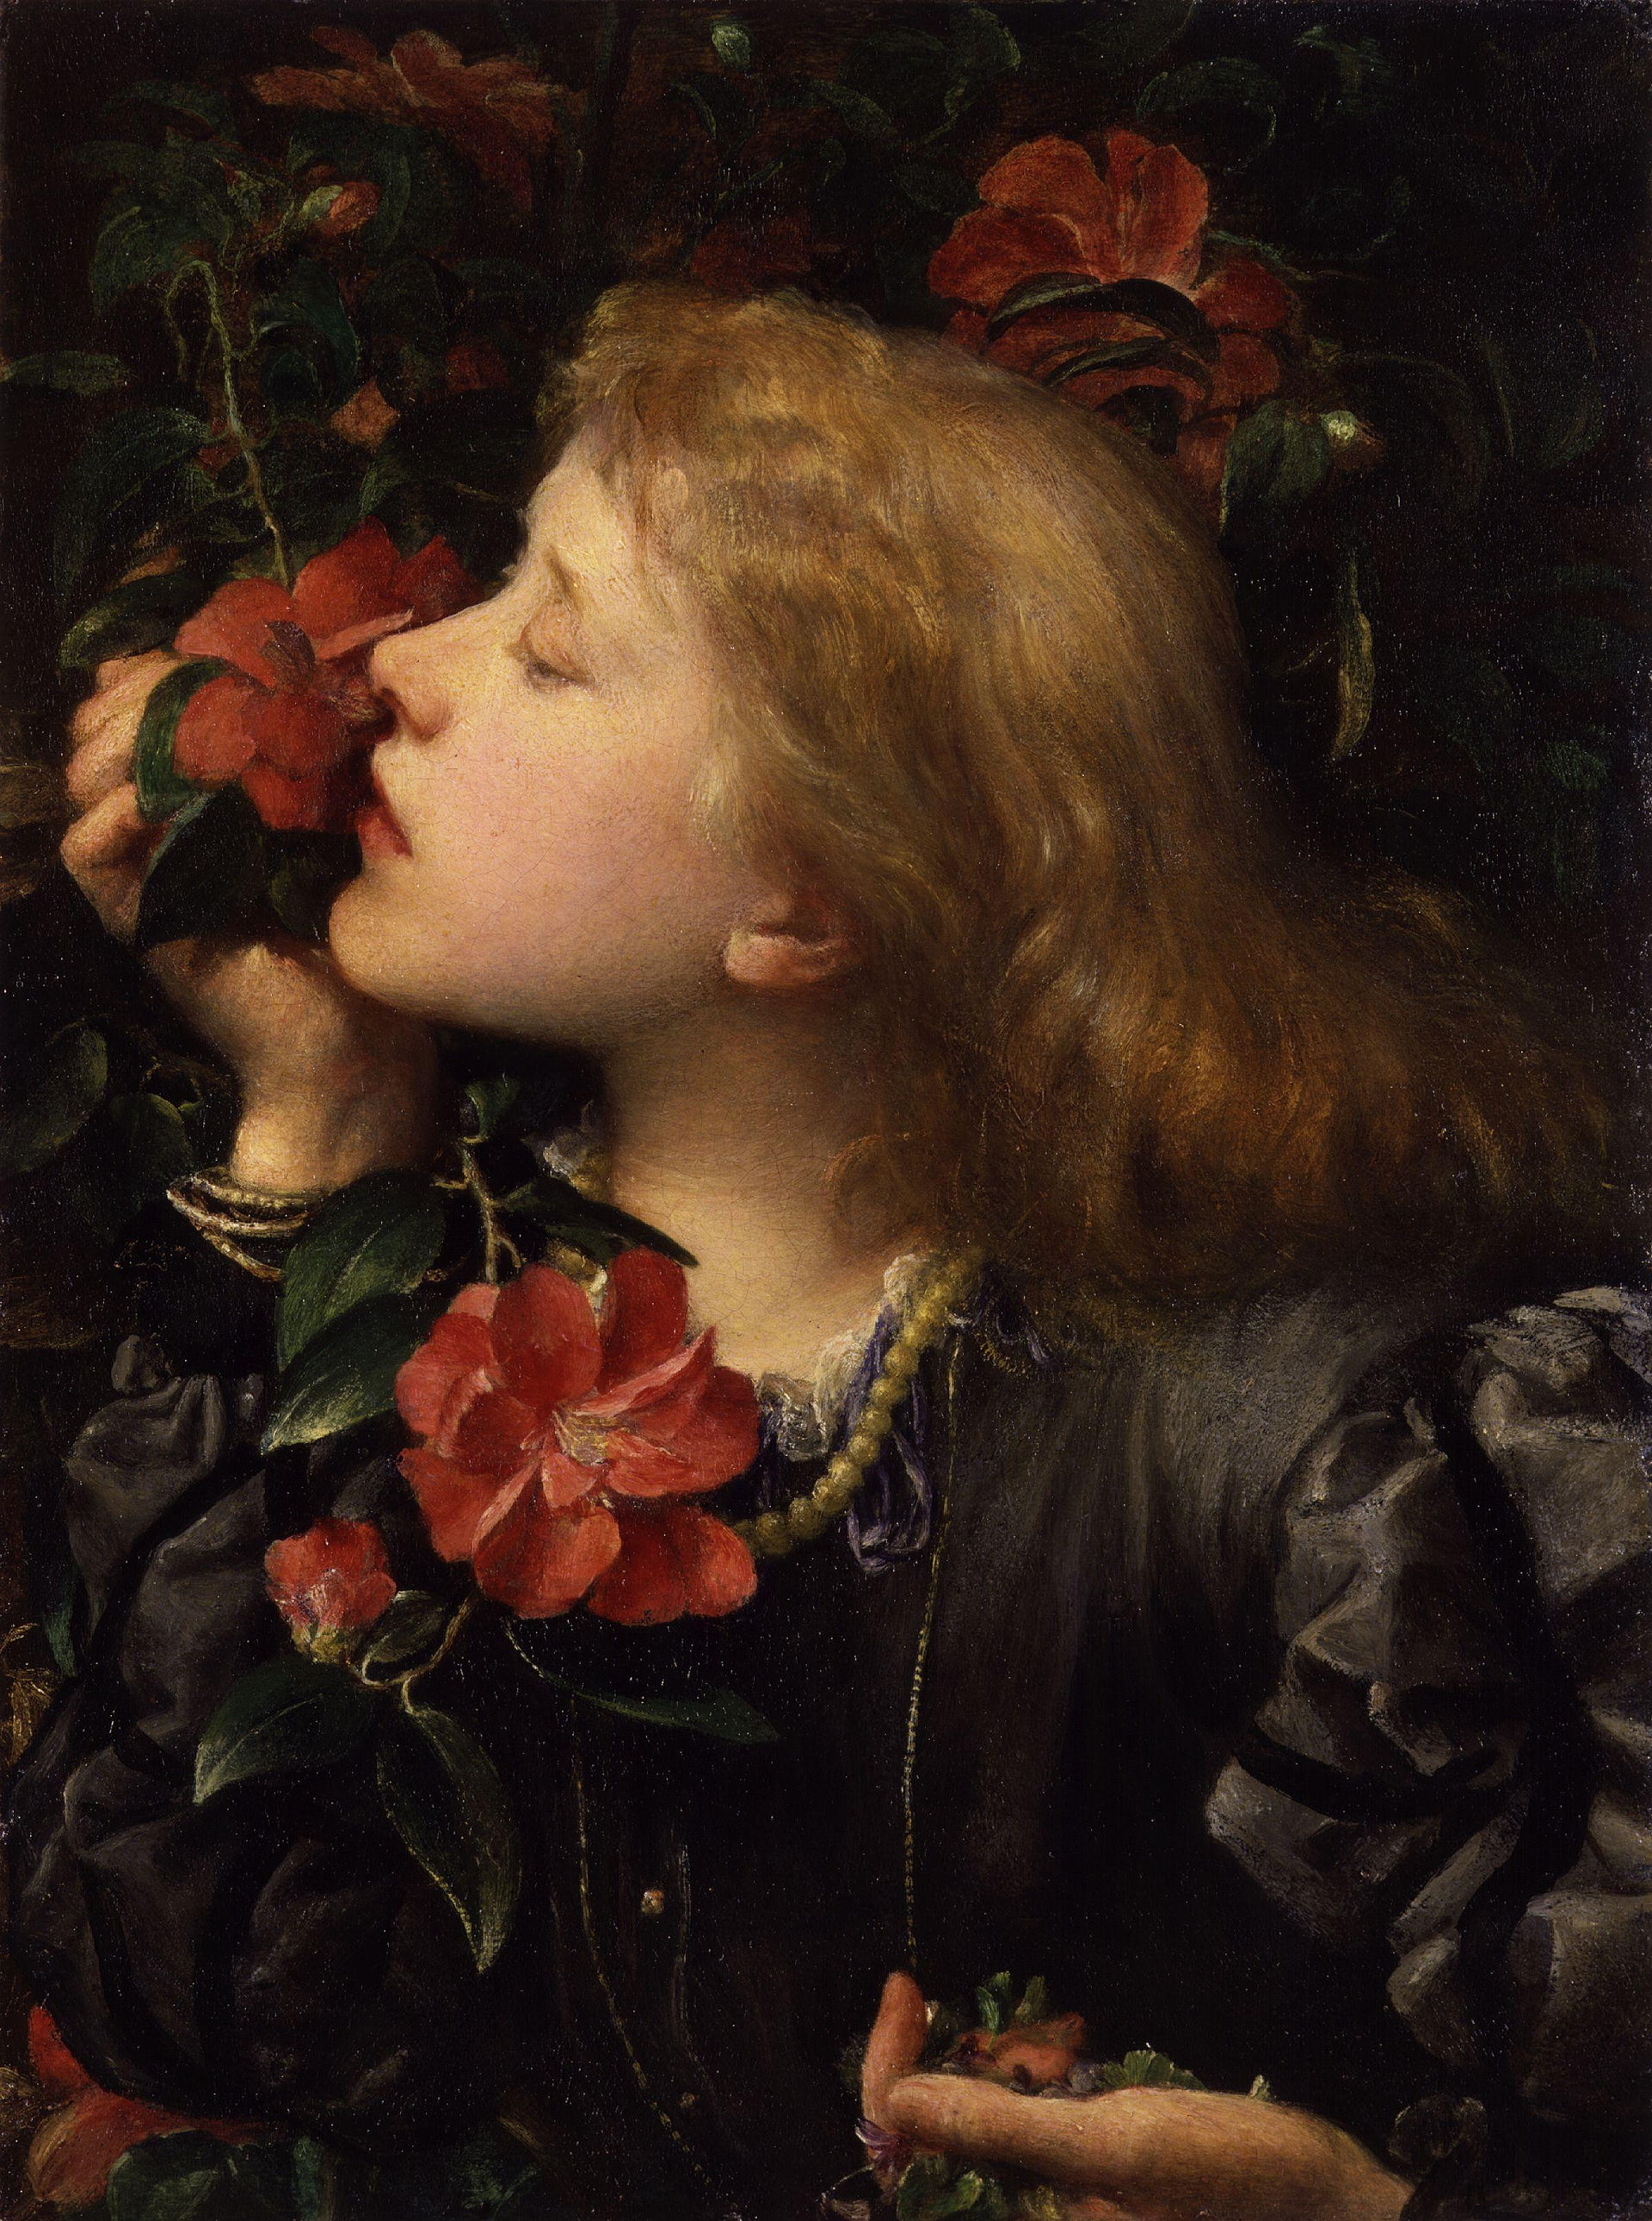 Inspiration: “Dame Alice Ellen Terry Choosing,” by George Frederic Watts